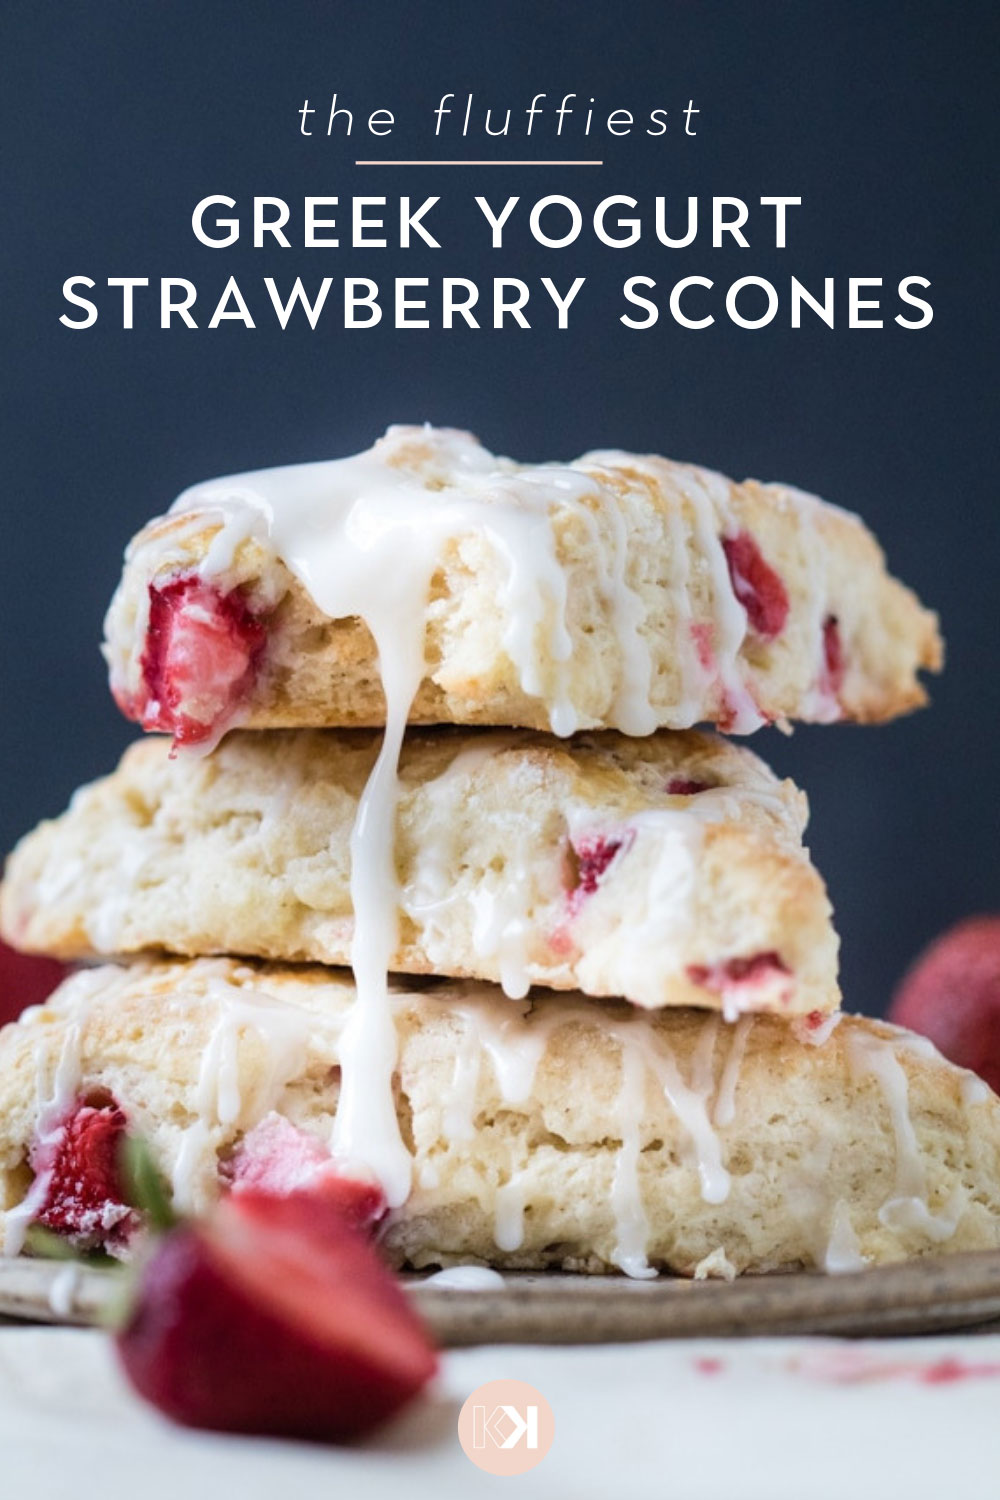 Pin image example for Krolls Korner with text "the fluffiest greek yogurt strawberry scones".